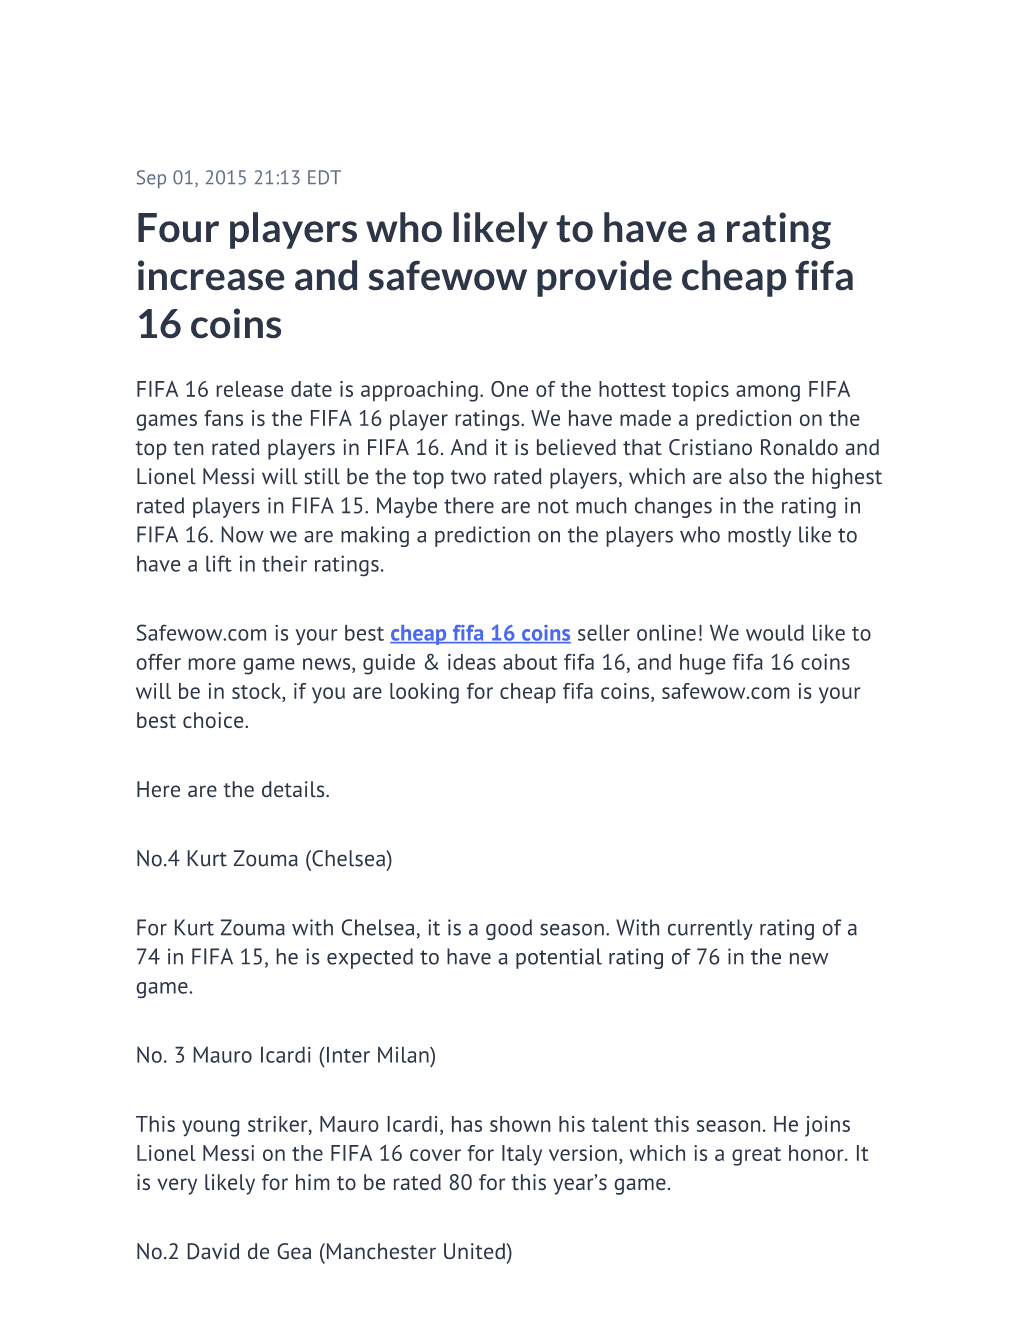 Four Players Who Likely to Have a Rating Increase and Safewow Provide Cheap Fifa 16 Coins